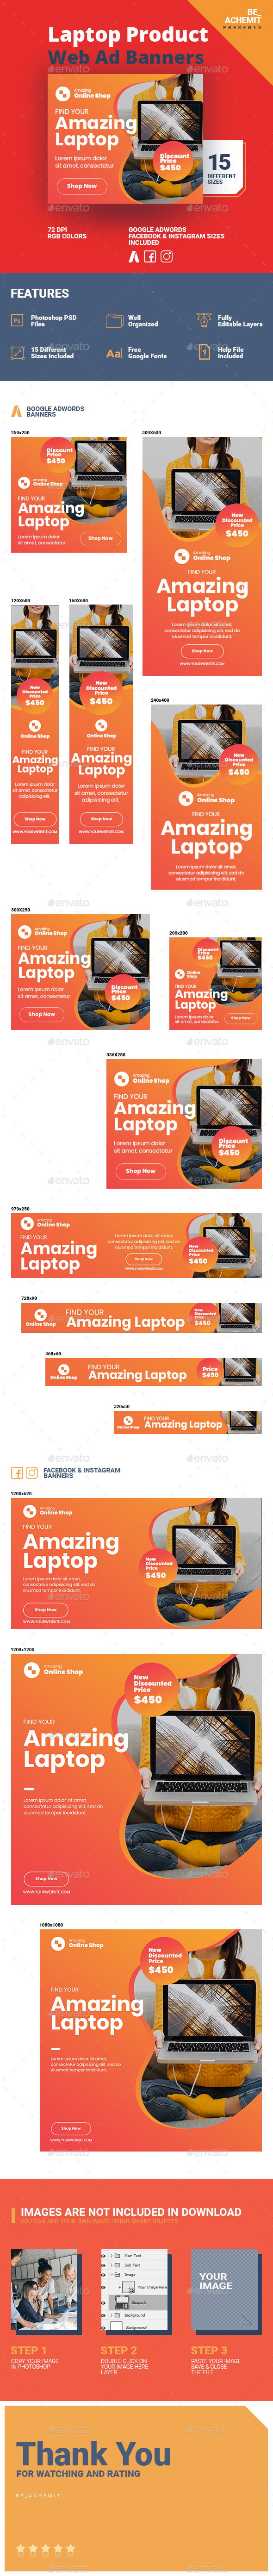 [DOWNLOAD]Laptop Product Web Banner Ad